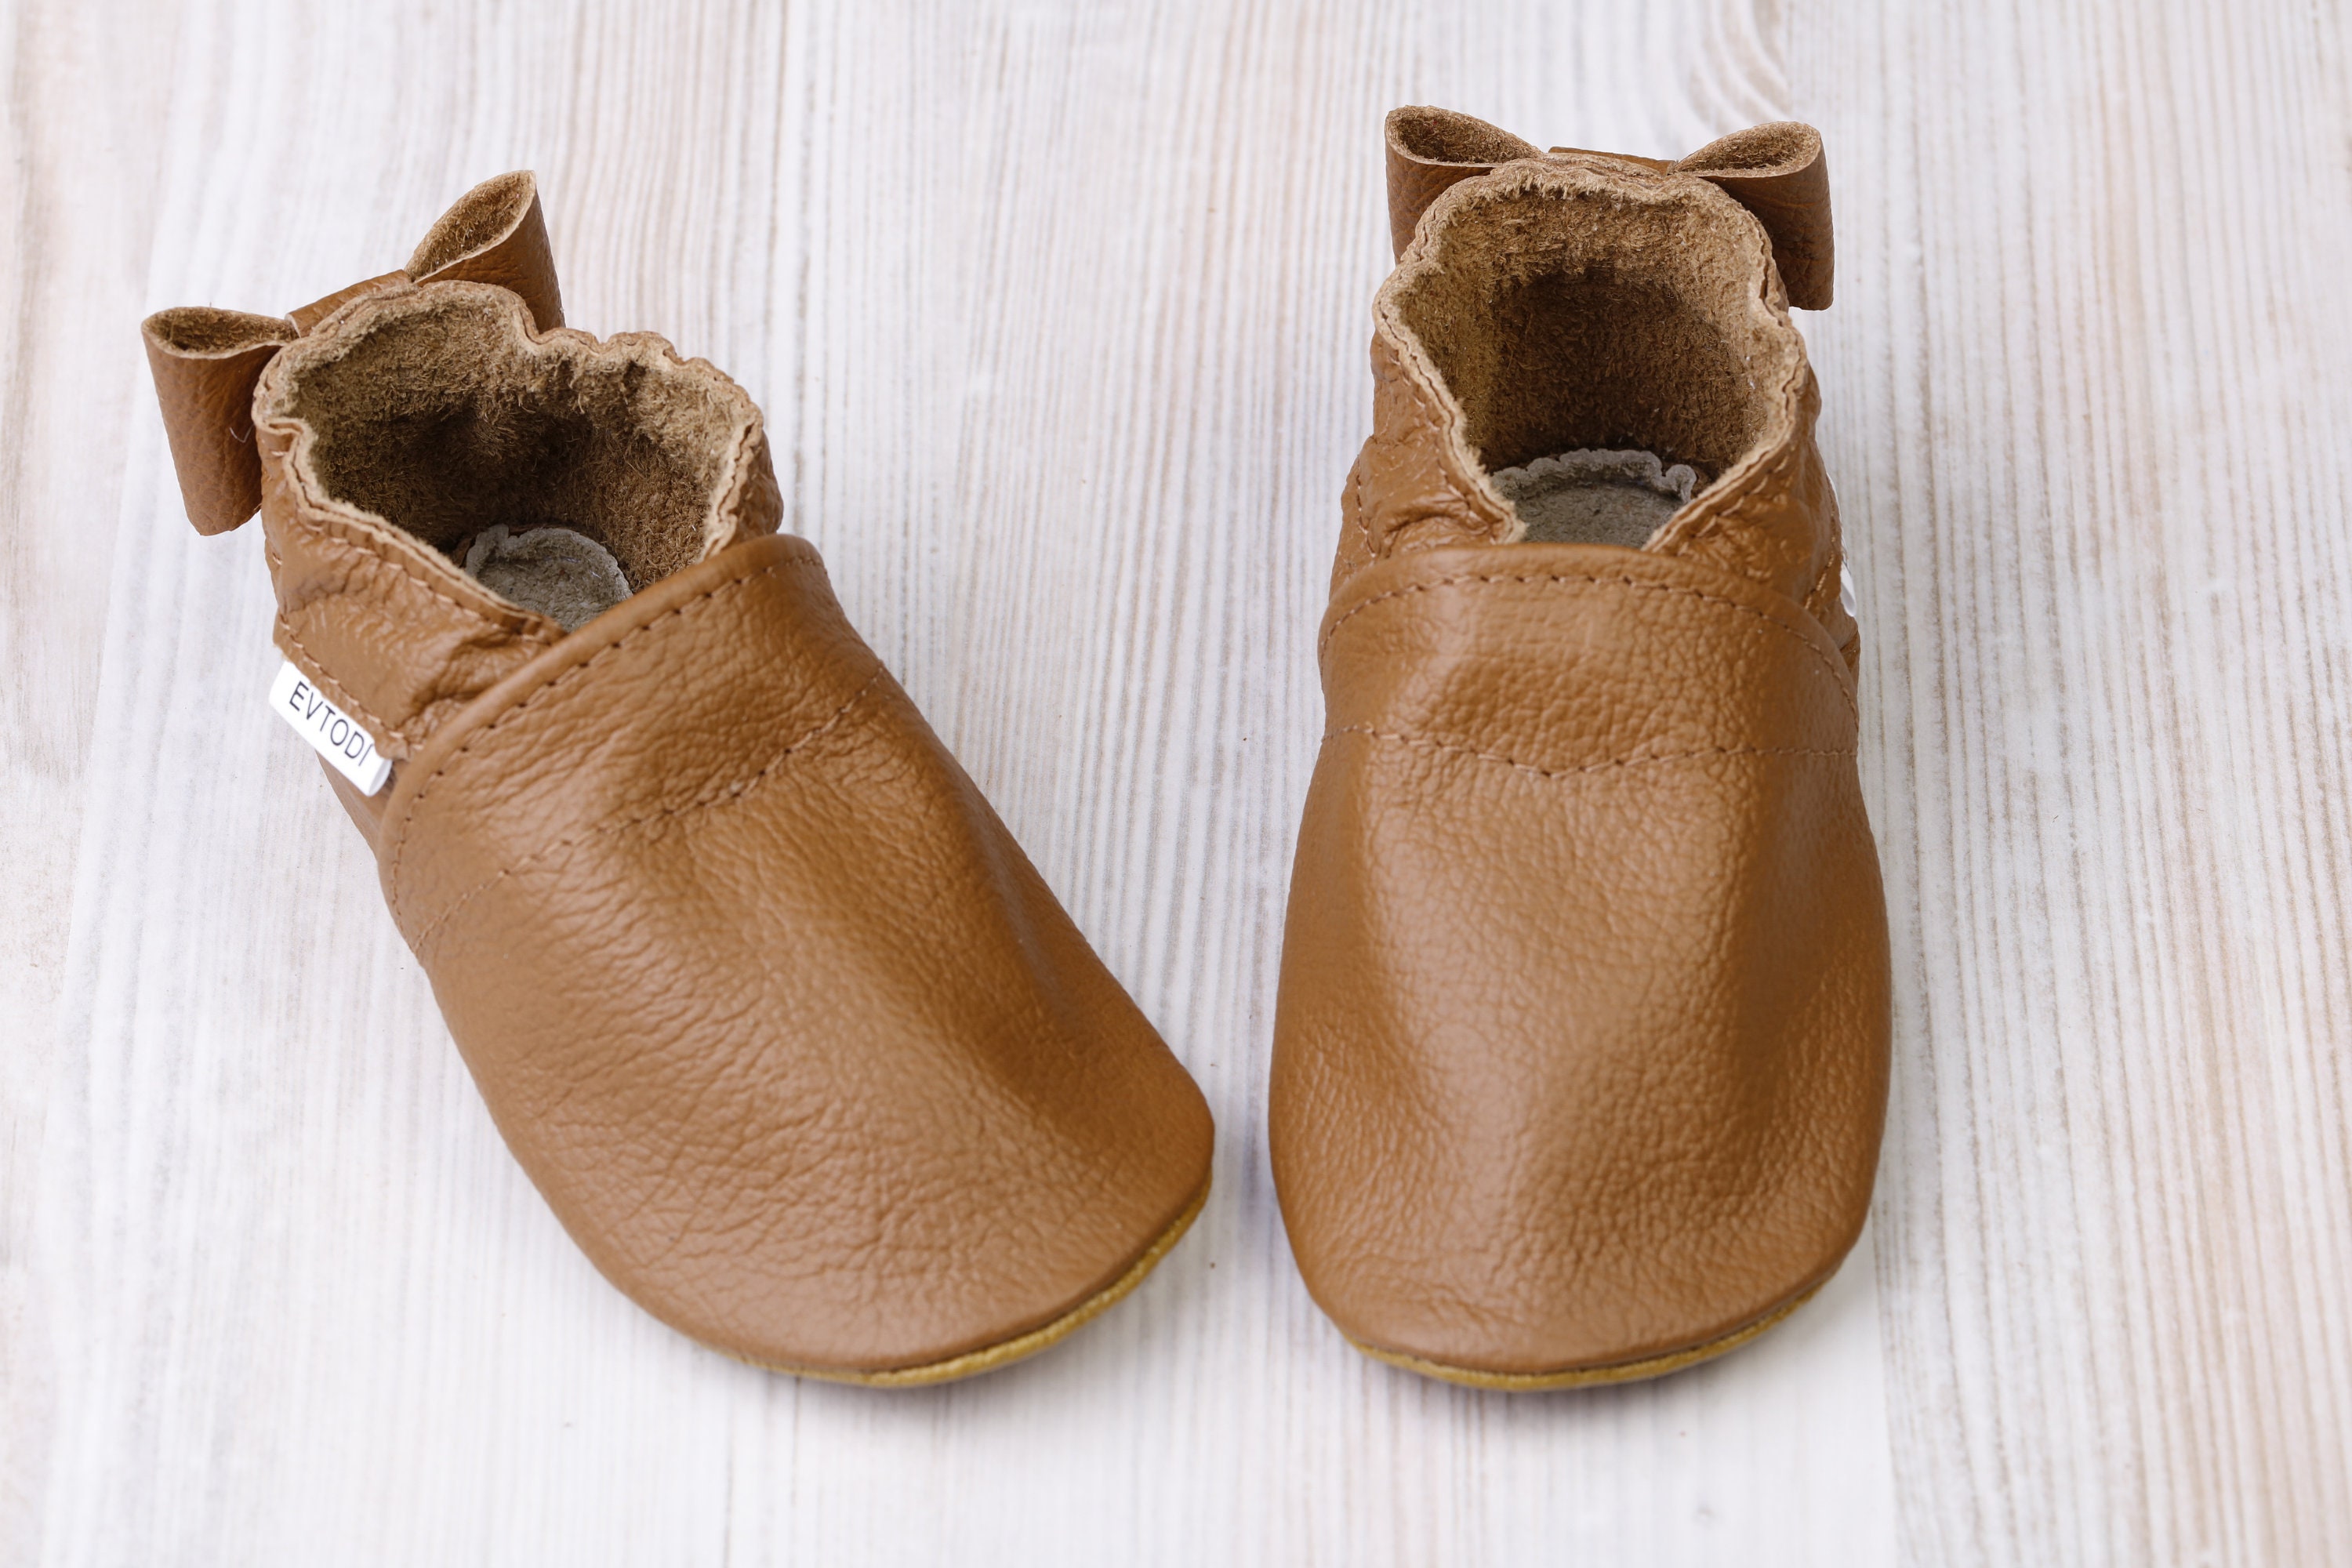 halfrond vitaliteit Communicatie netwerk Caramel/brown Leather Baby Shoes Soft Sole Baby Shoes Baby - Etsy